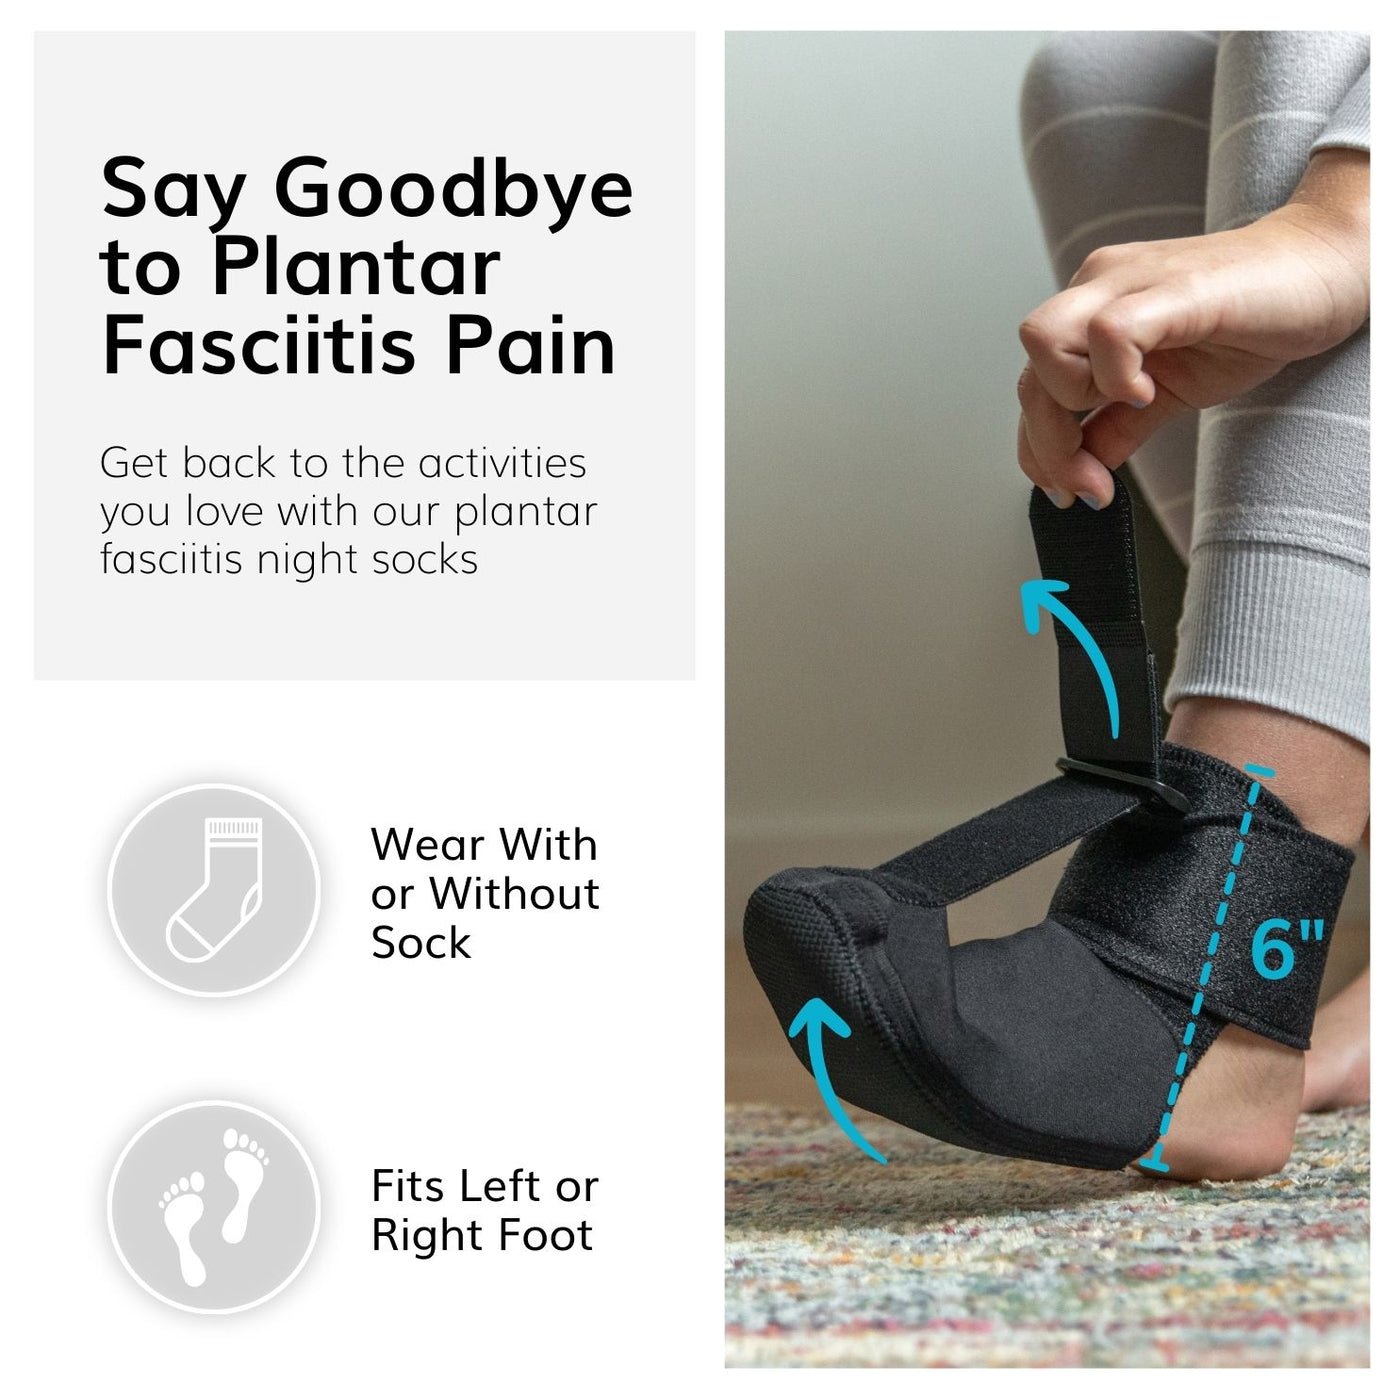 Our soft stretching boot for sleeping can be worn on right or left foot. For added comfort, wear a sock under the brace